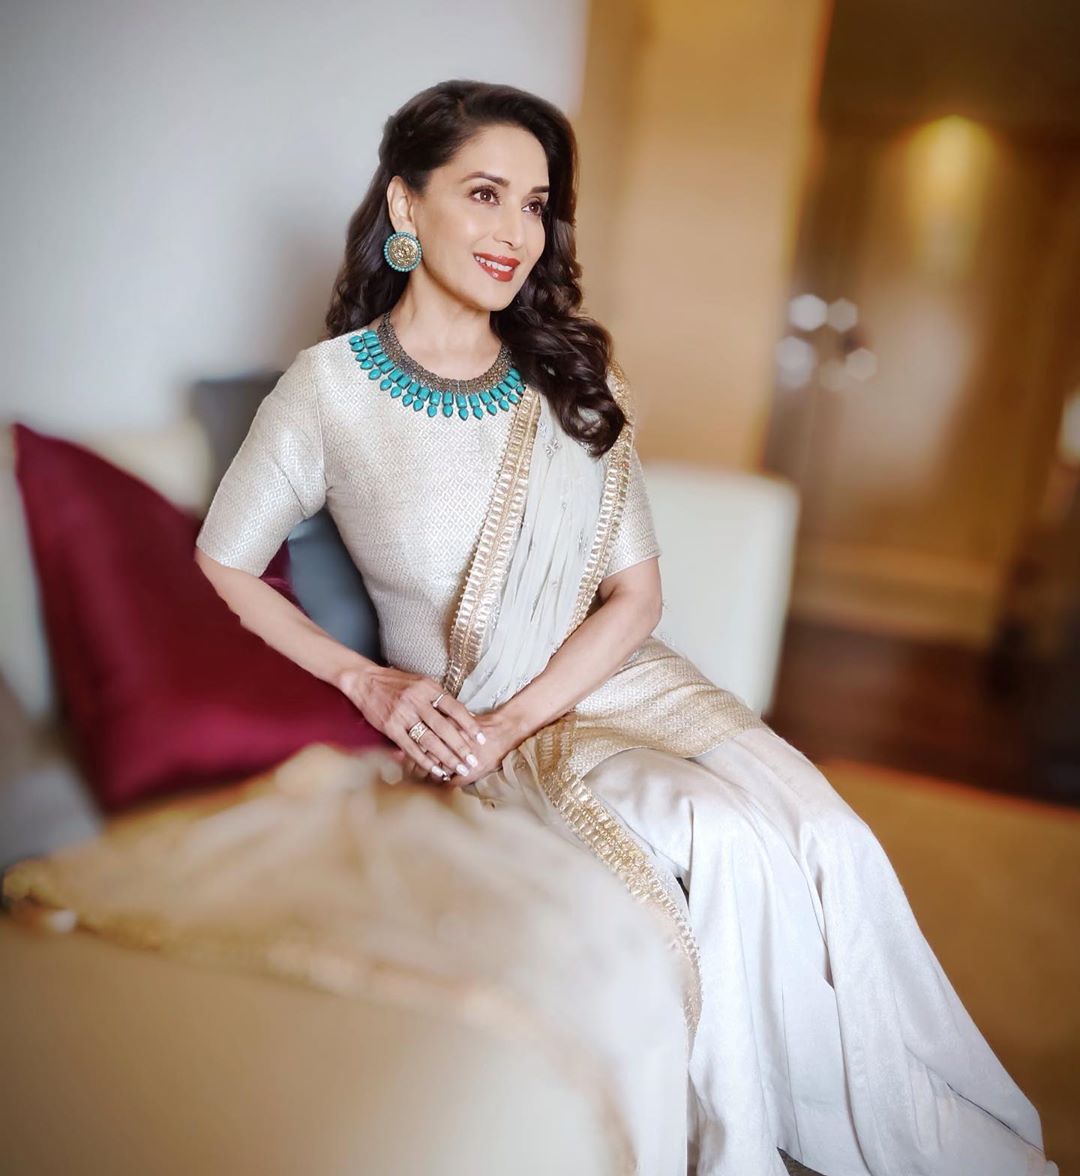 Madhuri Dixit shared her stunning pictures on Instagram